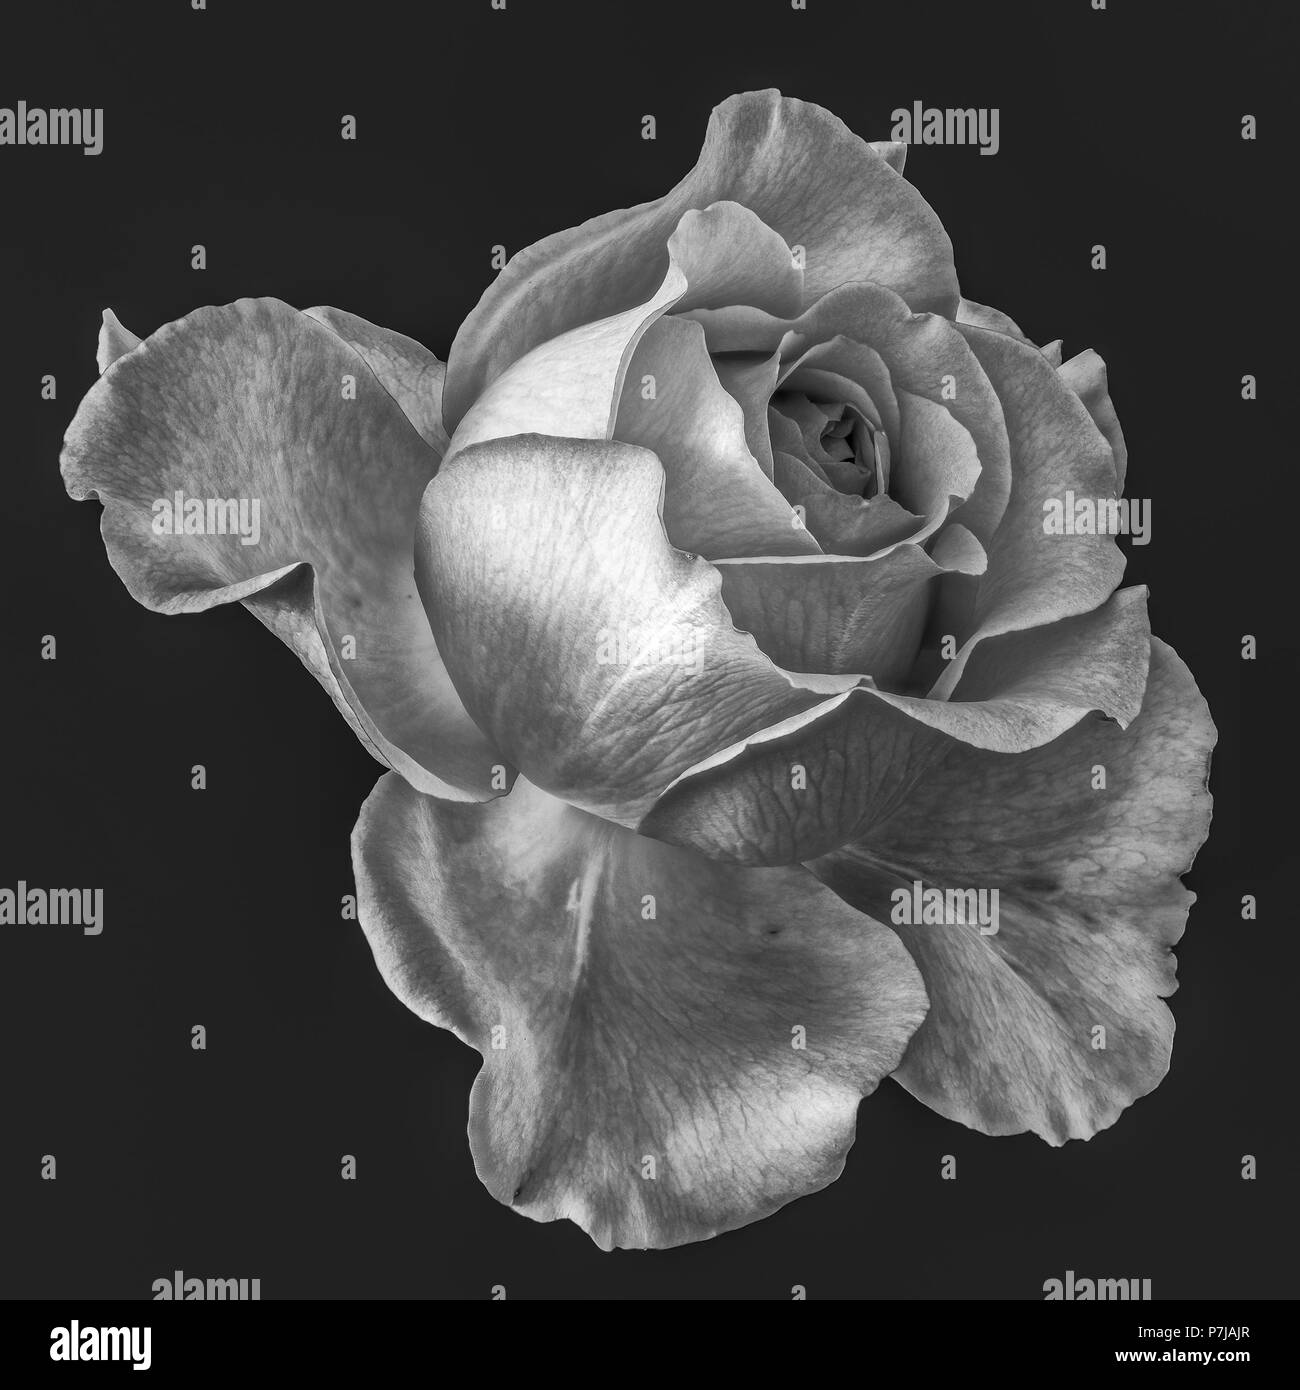 Monochrome fine art still life floral macro flower image of a single isolated flowering blooming rose blossom on dark gray background,detailed Stock Photo